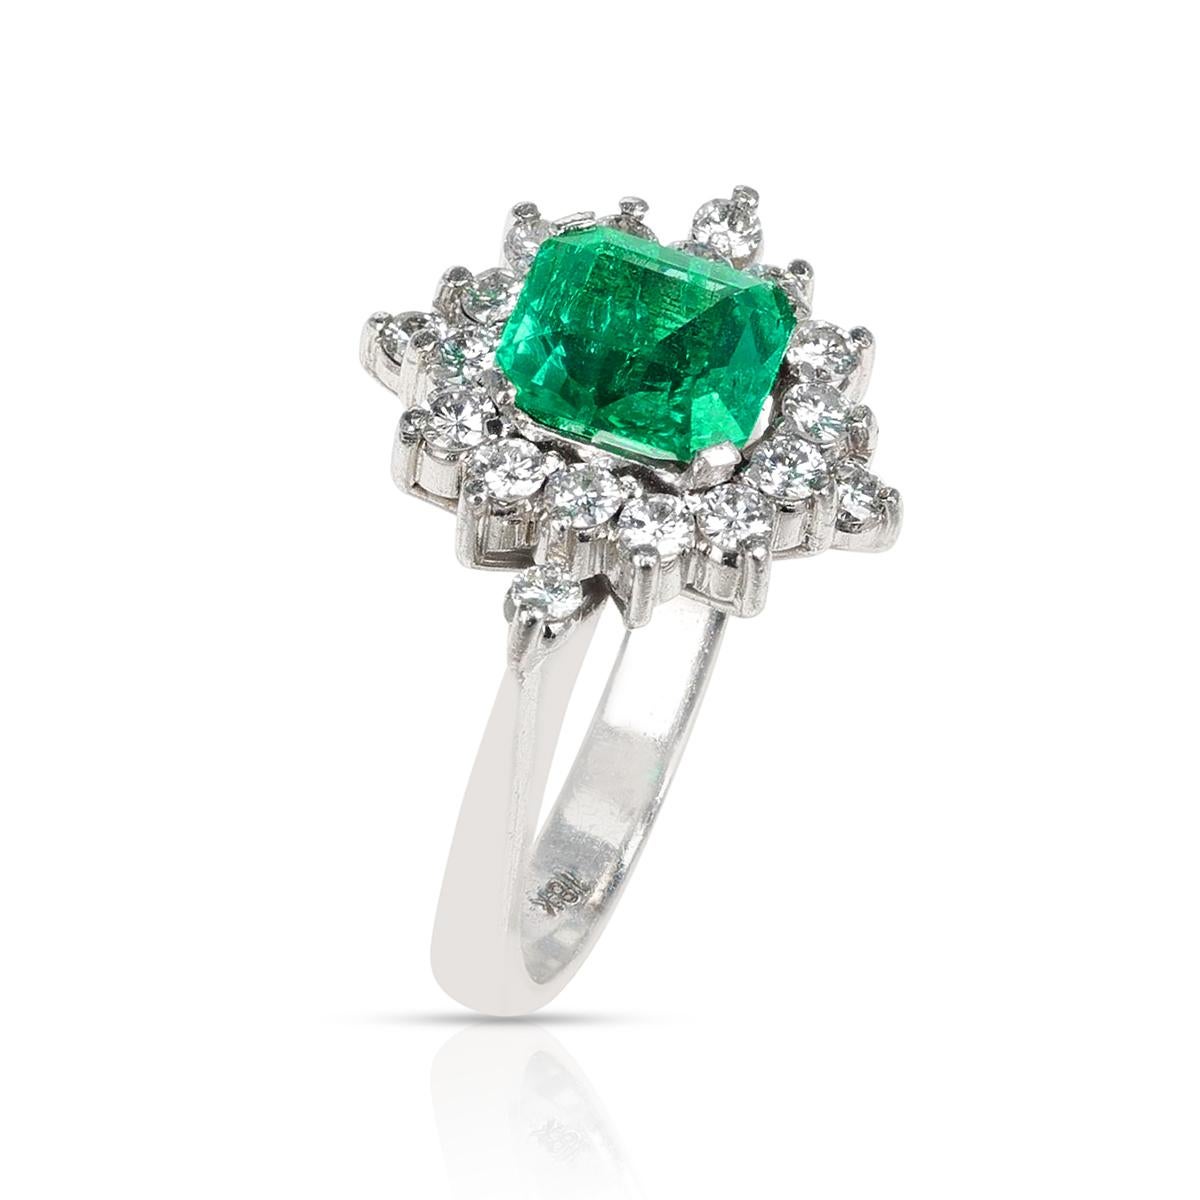 A 1.45 Square Emerald-Cut and Diamond Ring made in 18K White Gold. The ring size is US 5.75. The total weight is 5.64 grams. 

